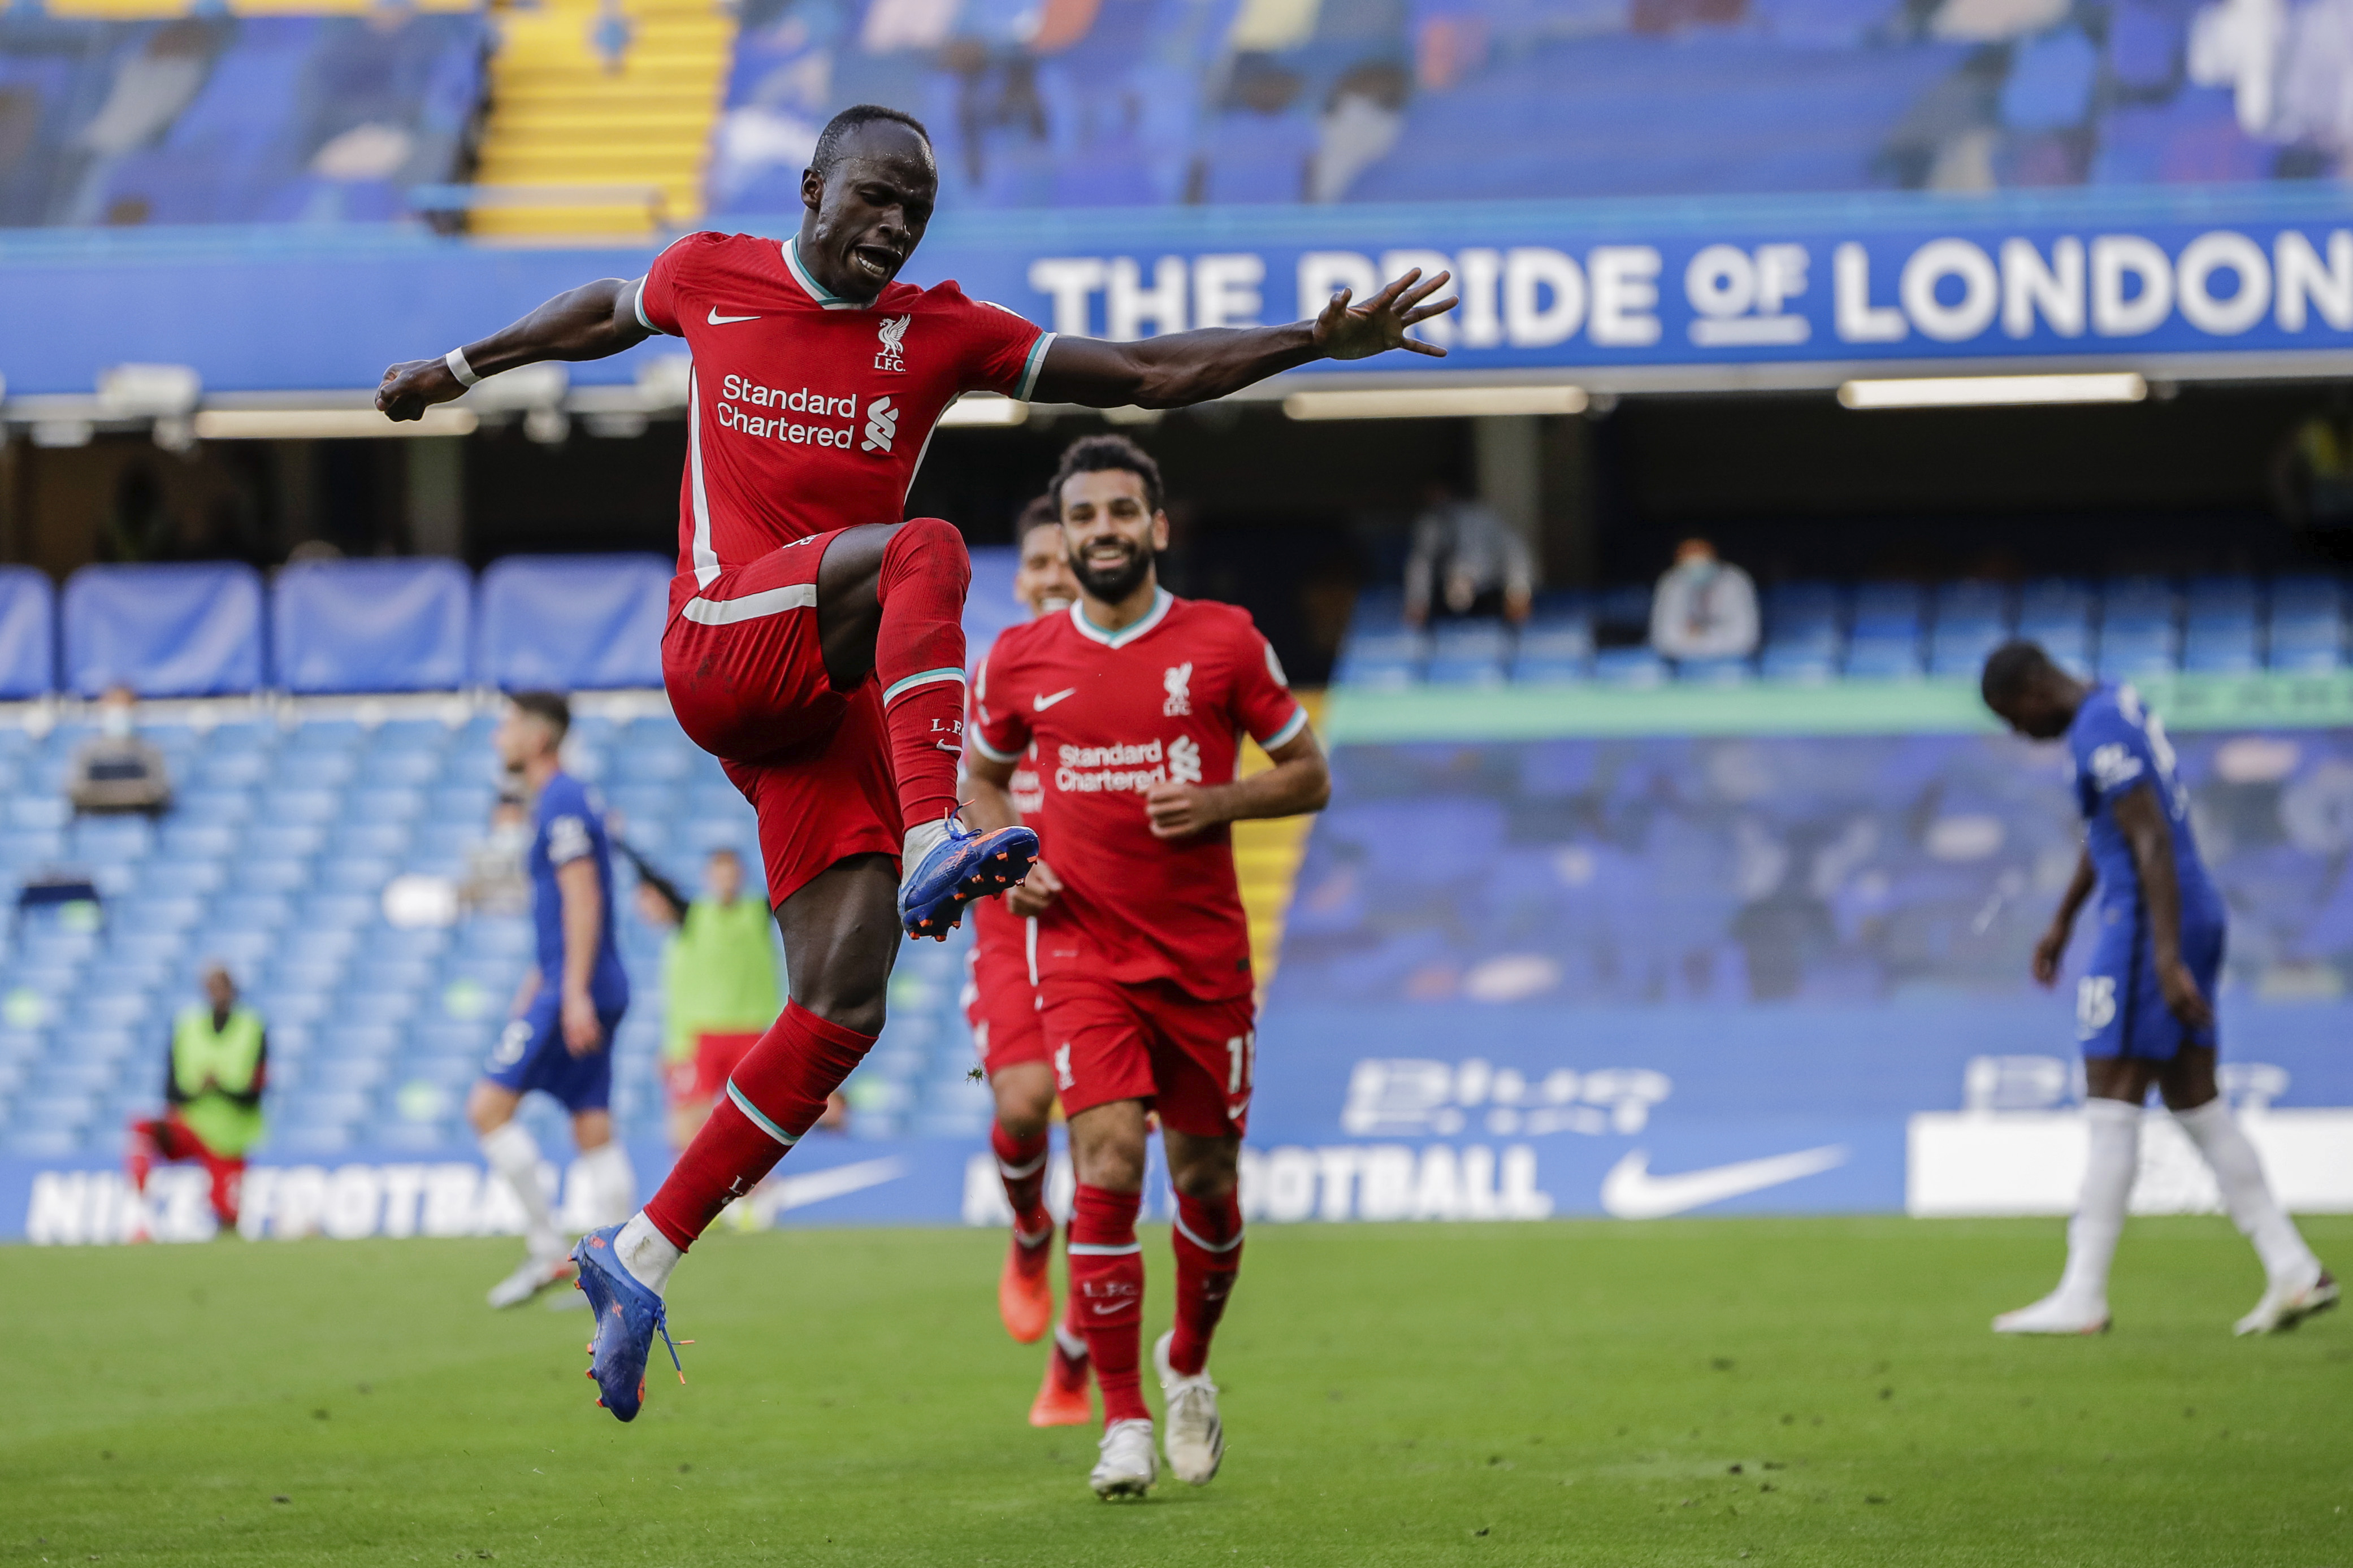 Liverpool vs. Arsenal Live stream, start time, TV, how to watch English Premier League 2020 (Mon